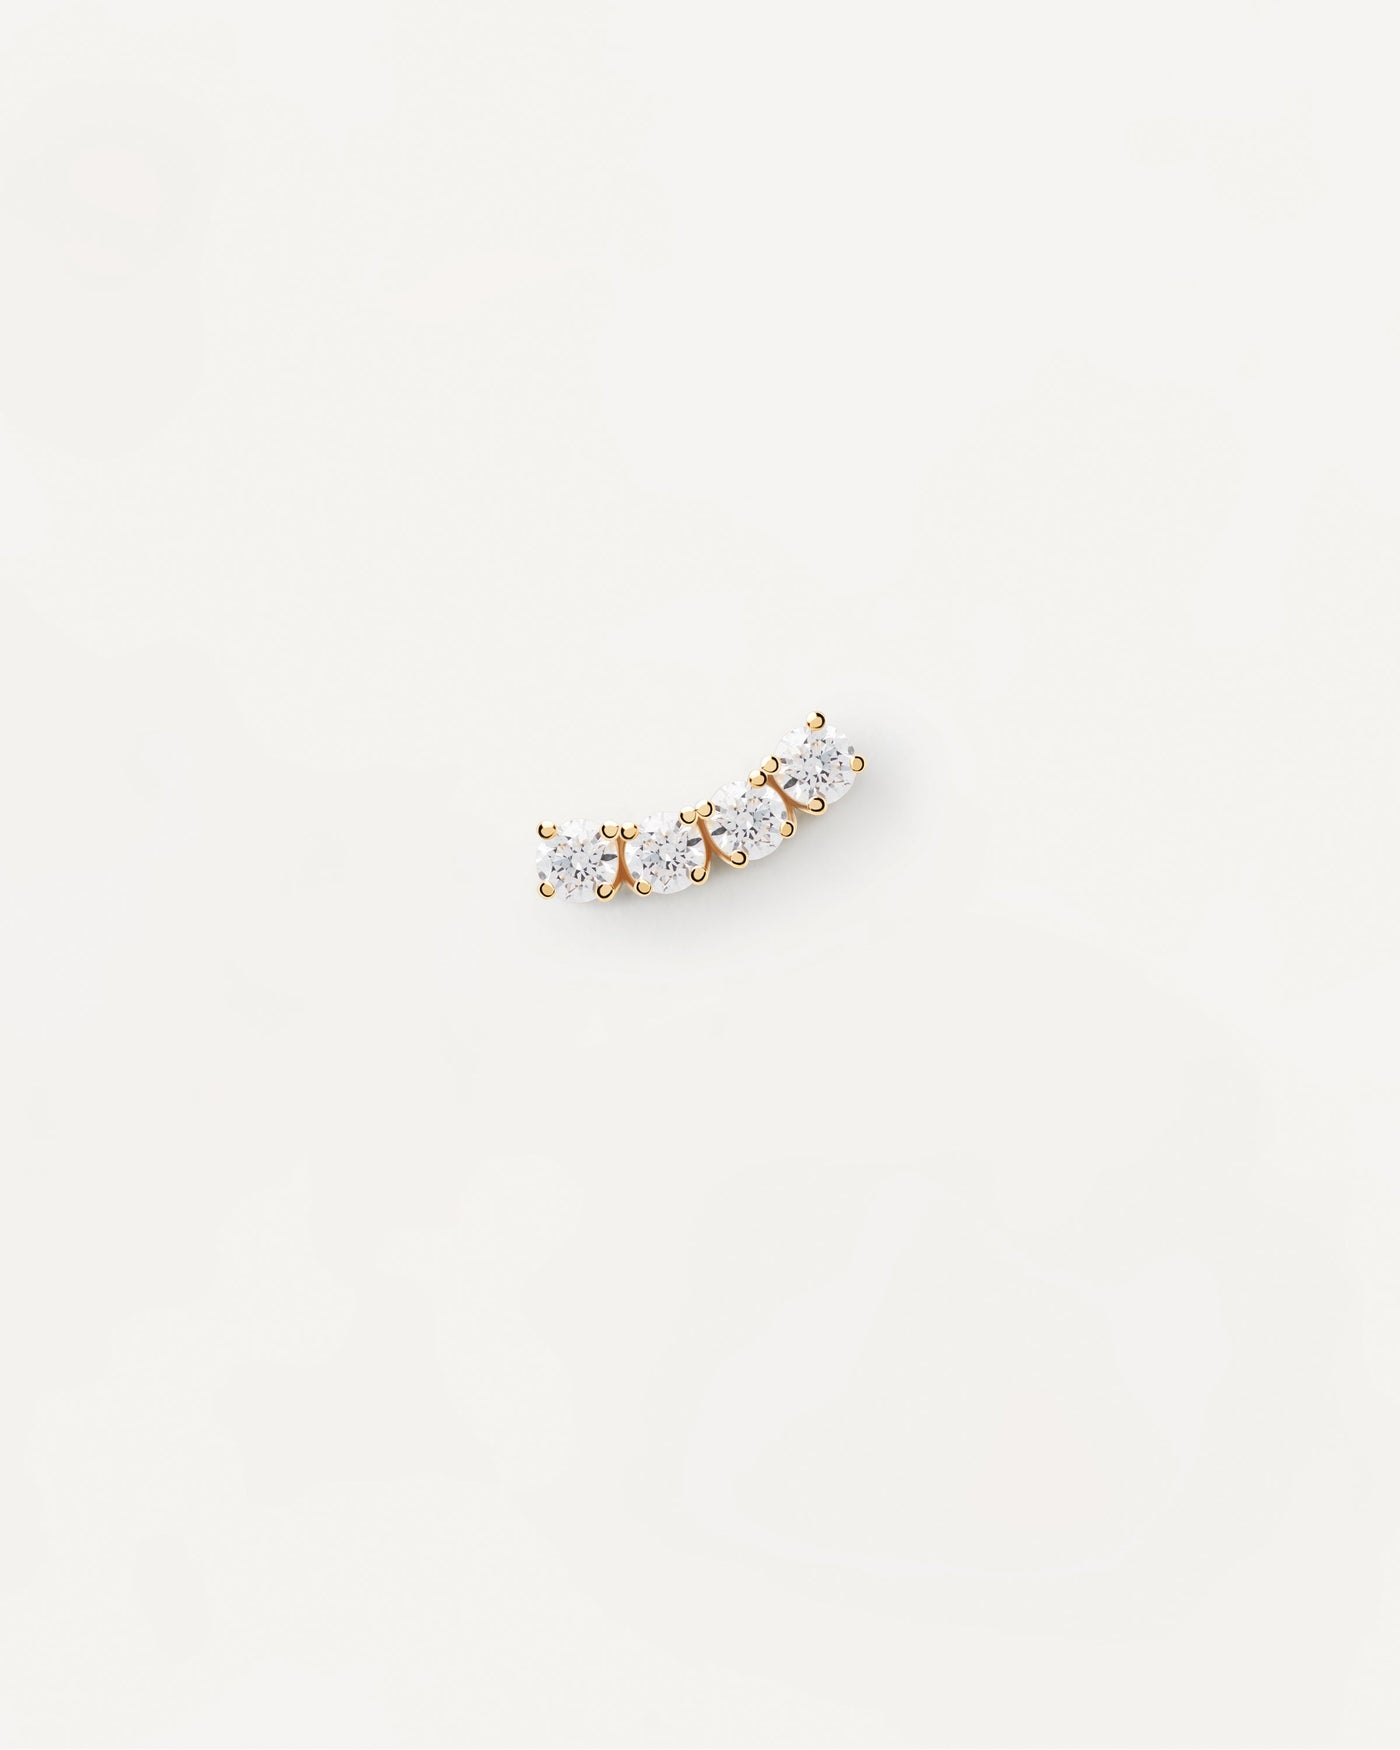 2023 Selection | Uma Single Earring. Wavy gold-plated ear piercing with 4 white zirconia. Get the latest arrival from PDPAOLA. Place your order safely and get this Best Seller. Free Shipping.